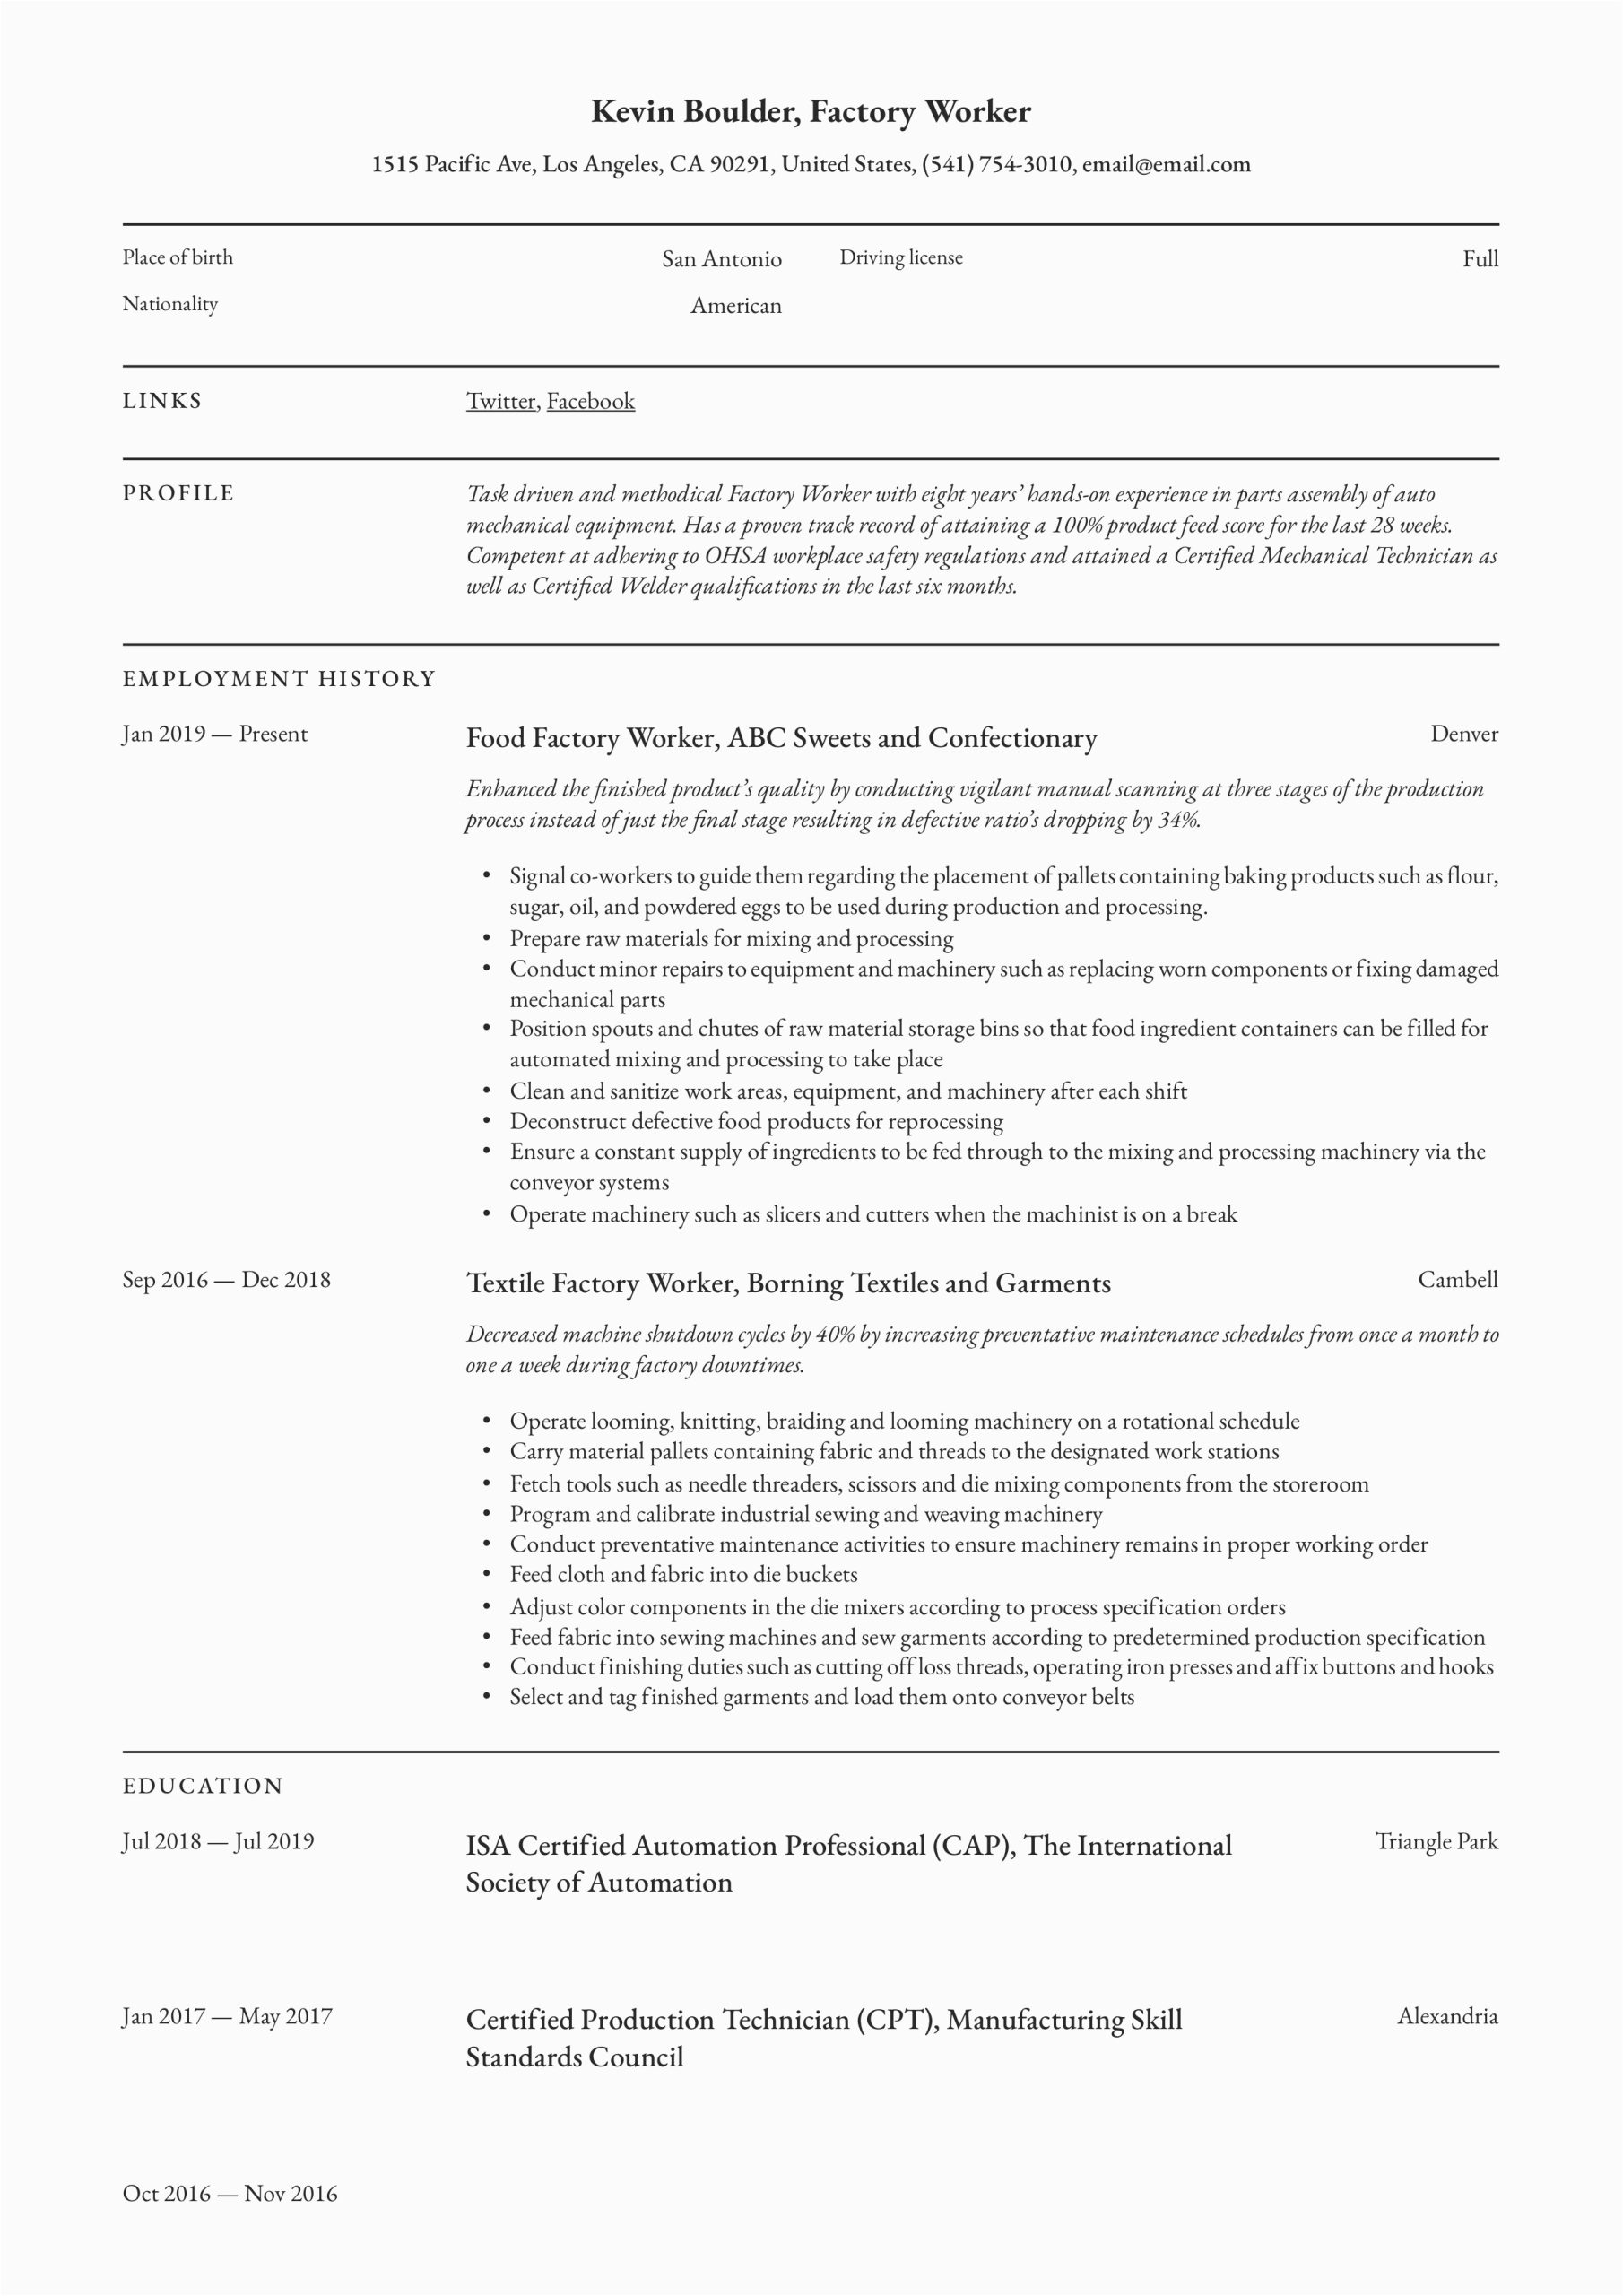 Sample Resume for Entry Level Factory Worker Resume Examples for Production Worker